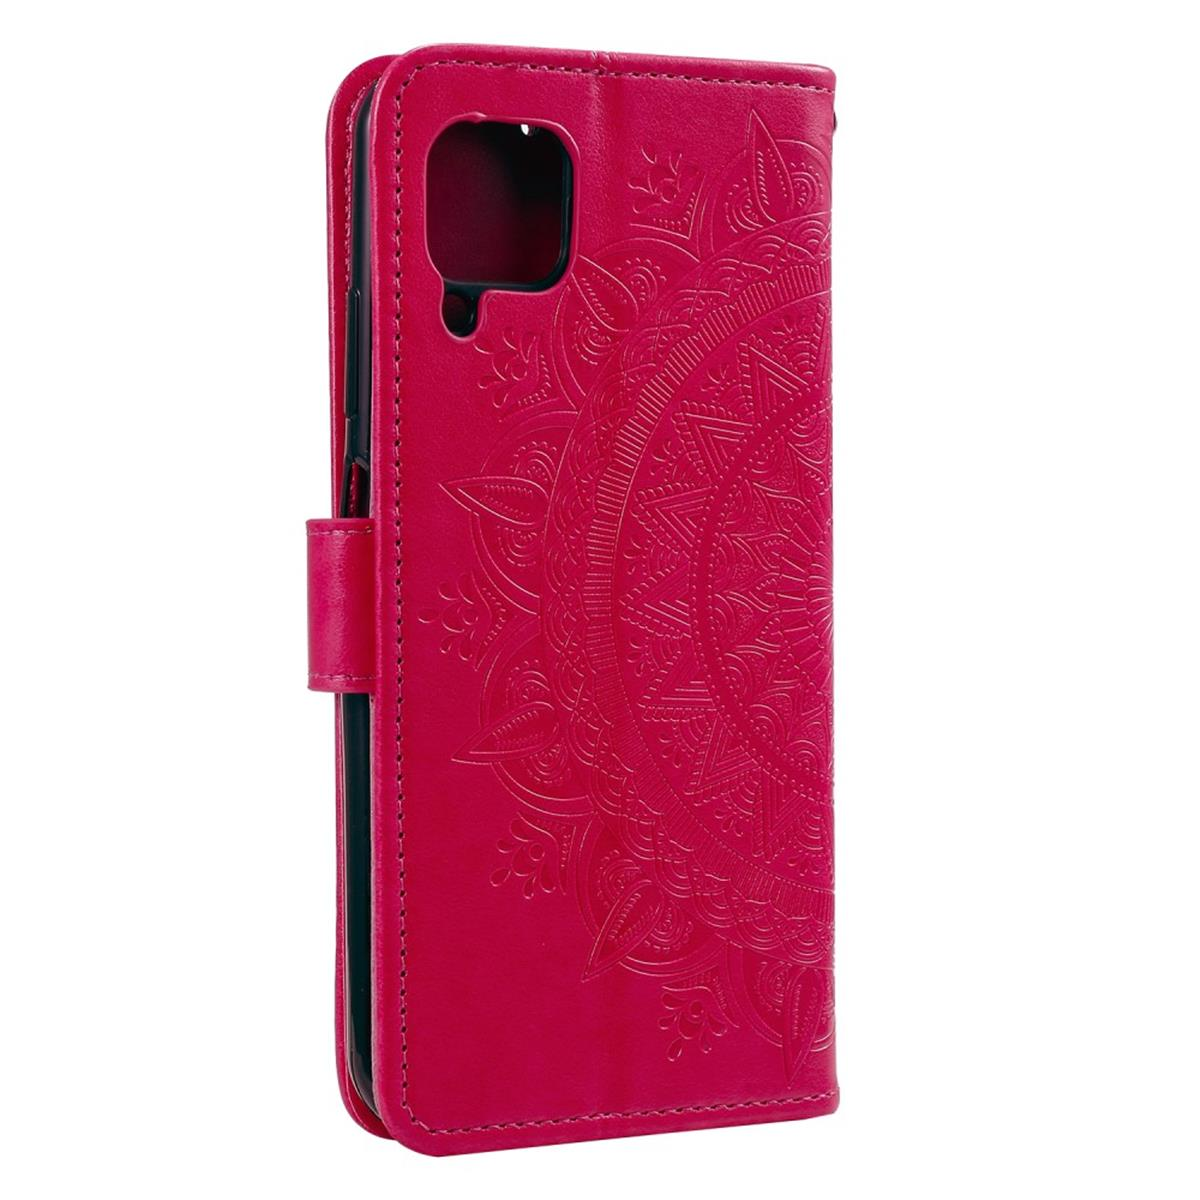 COVERKINGZ Klapphülle mit A22 Pink Muster, Bookcover, Mandala Samsung, 4G, Galaxy